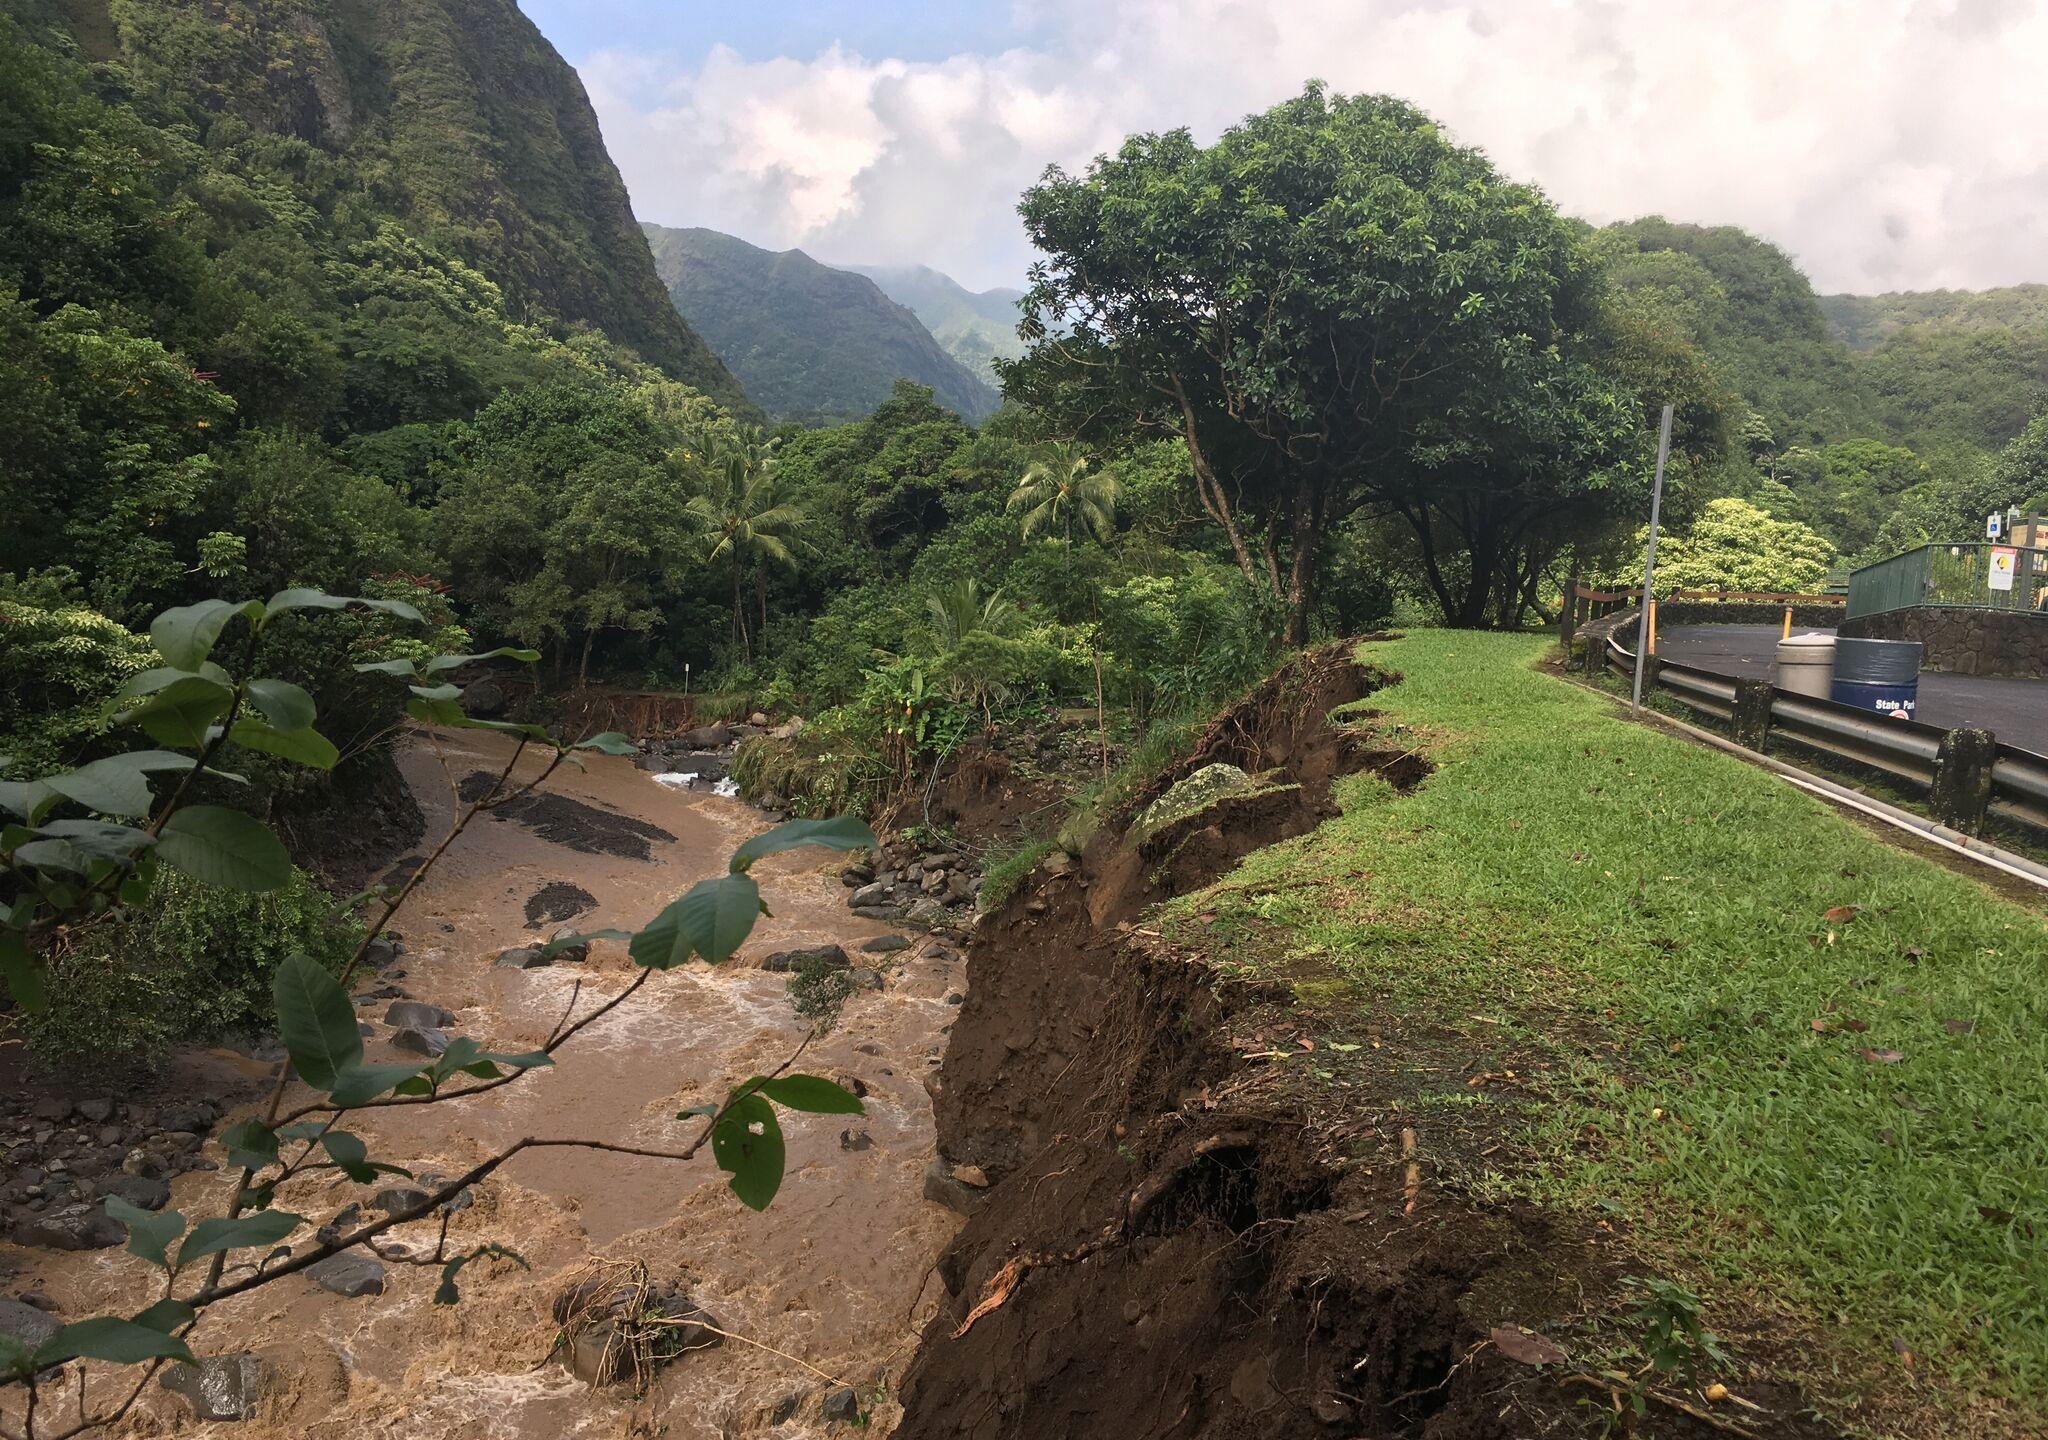 Iao Valley State Monument closed indefinitely due to